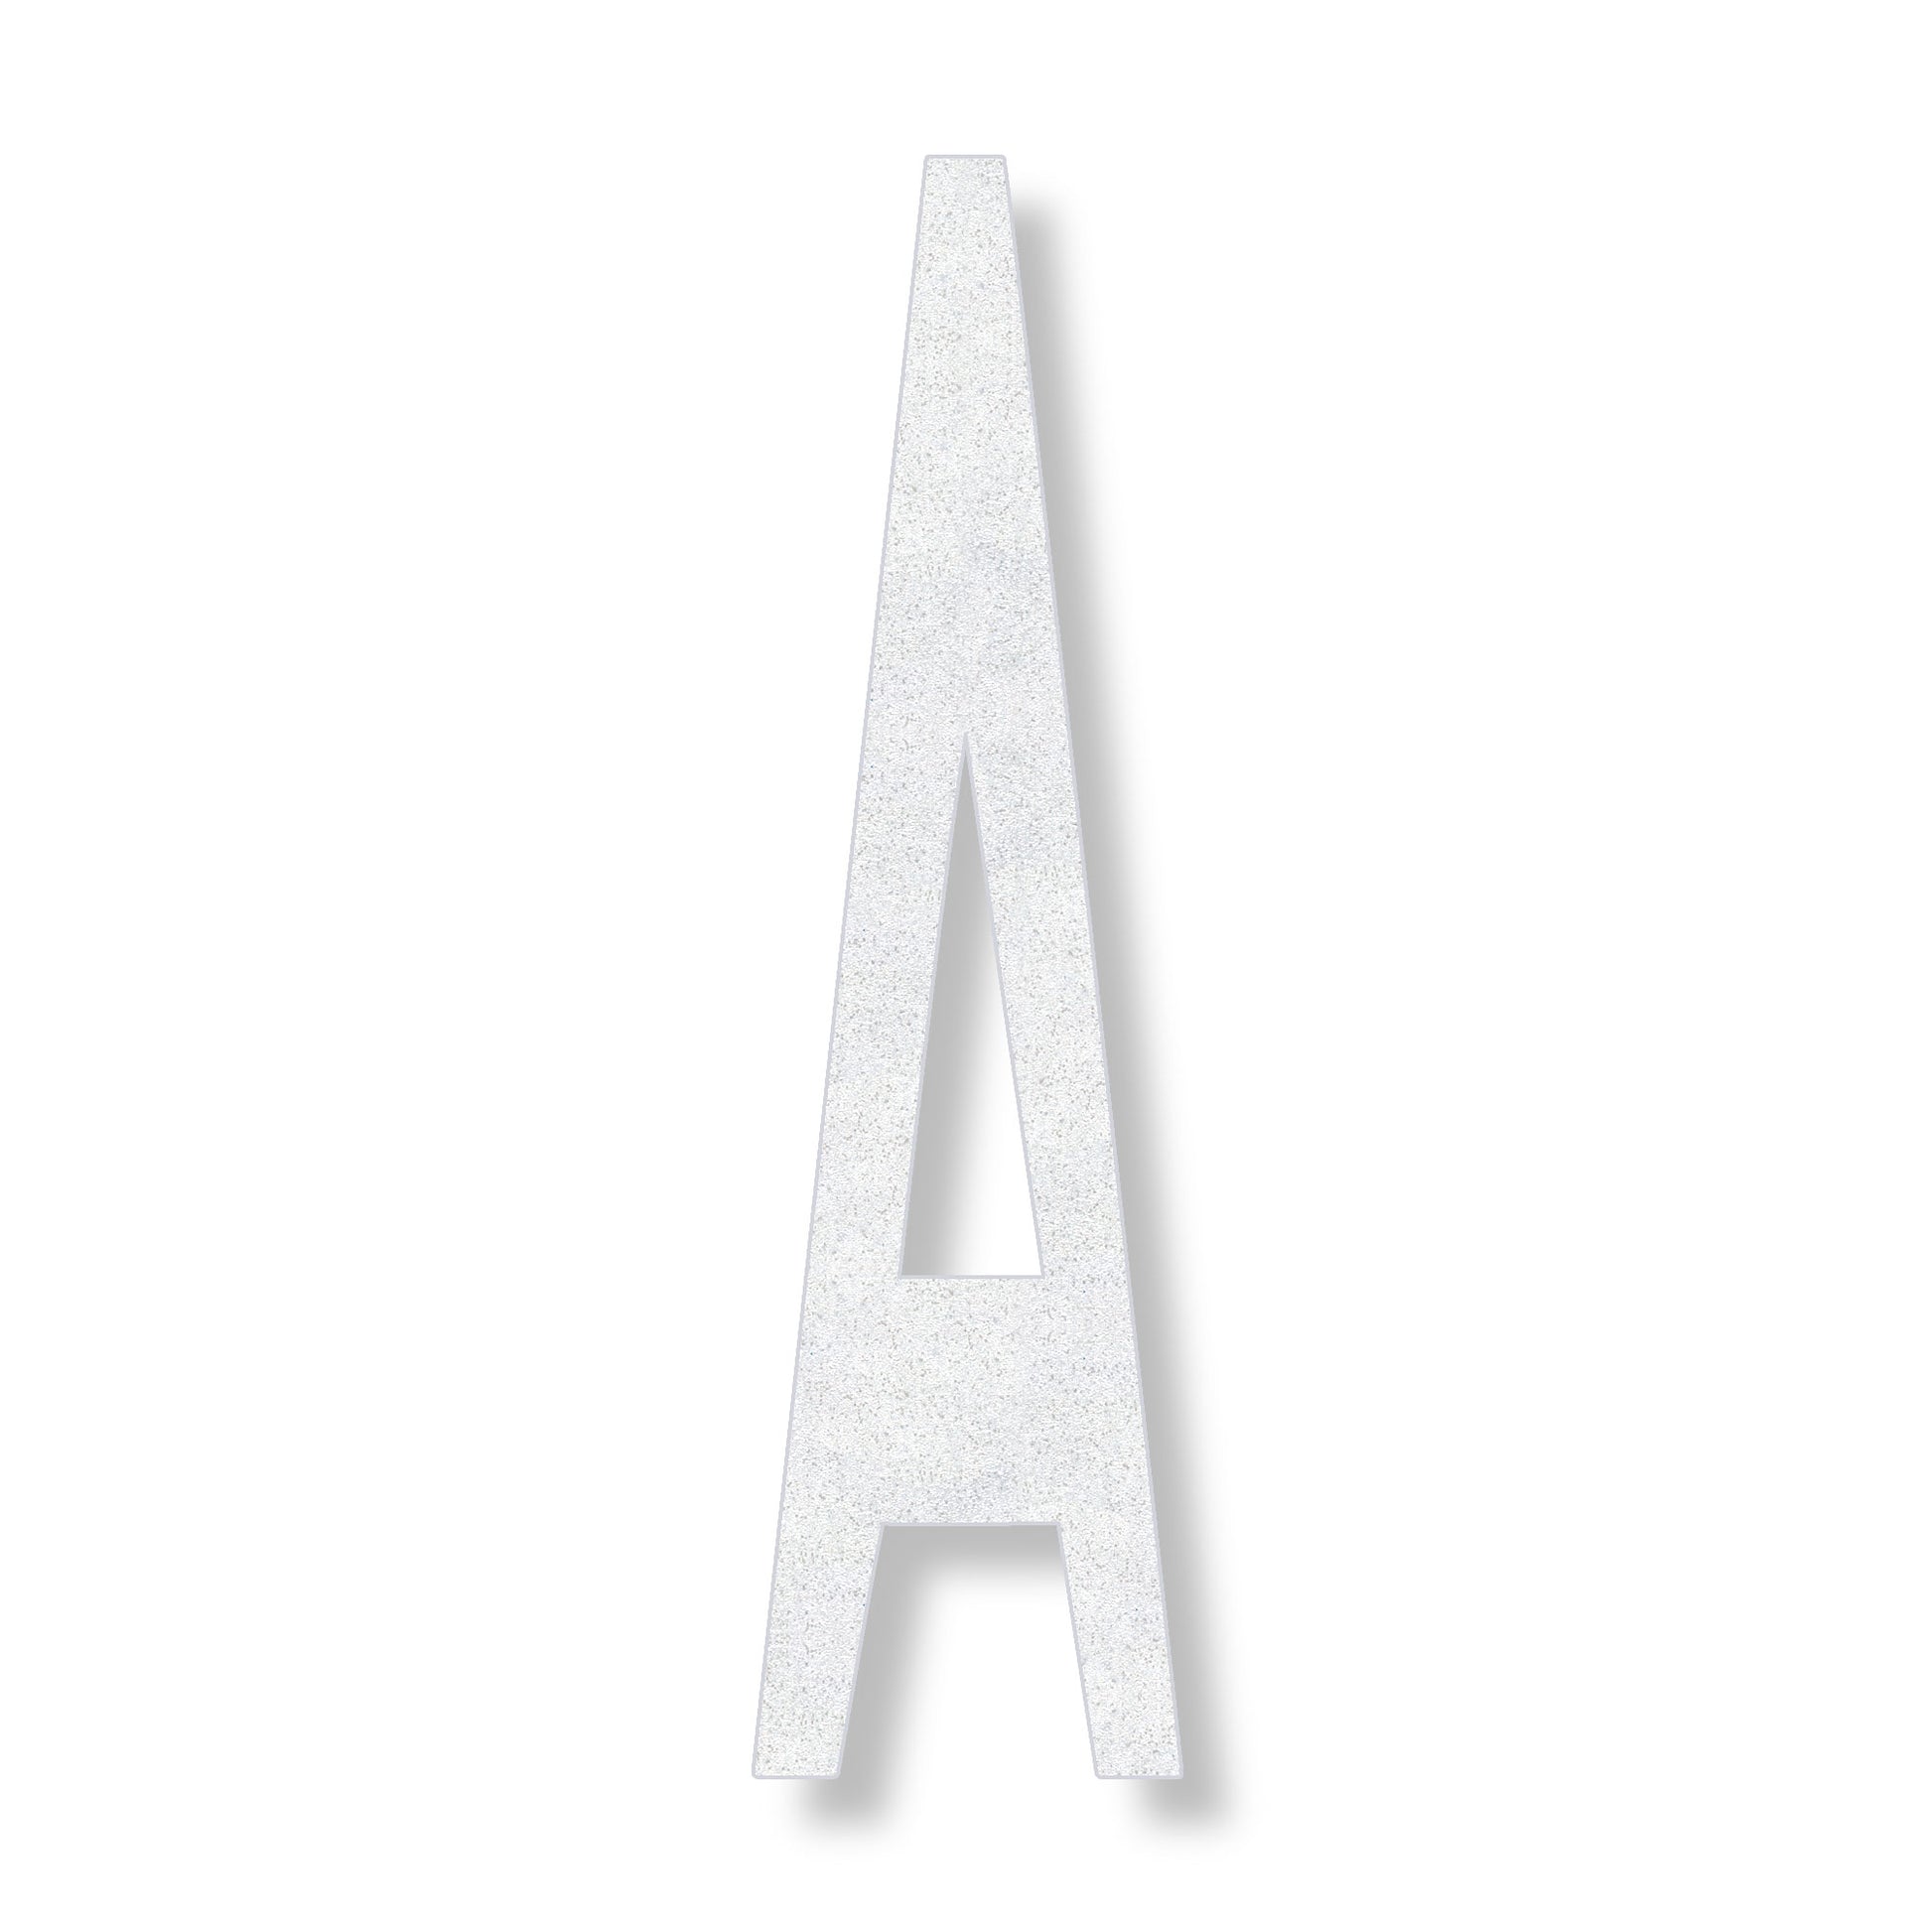 Letter A in white